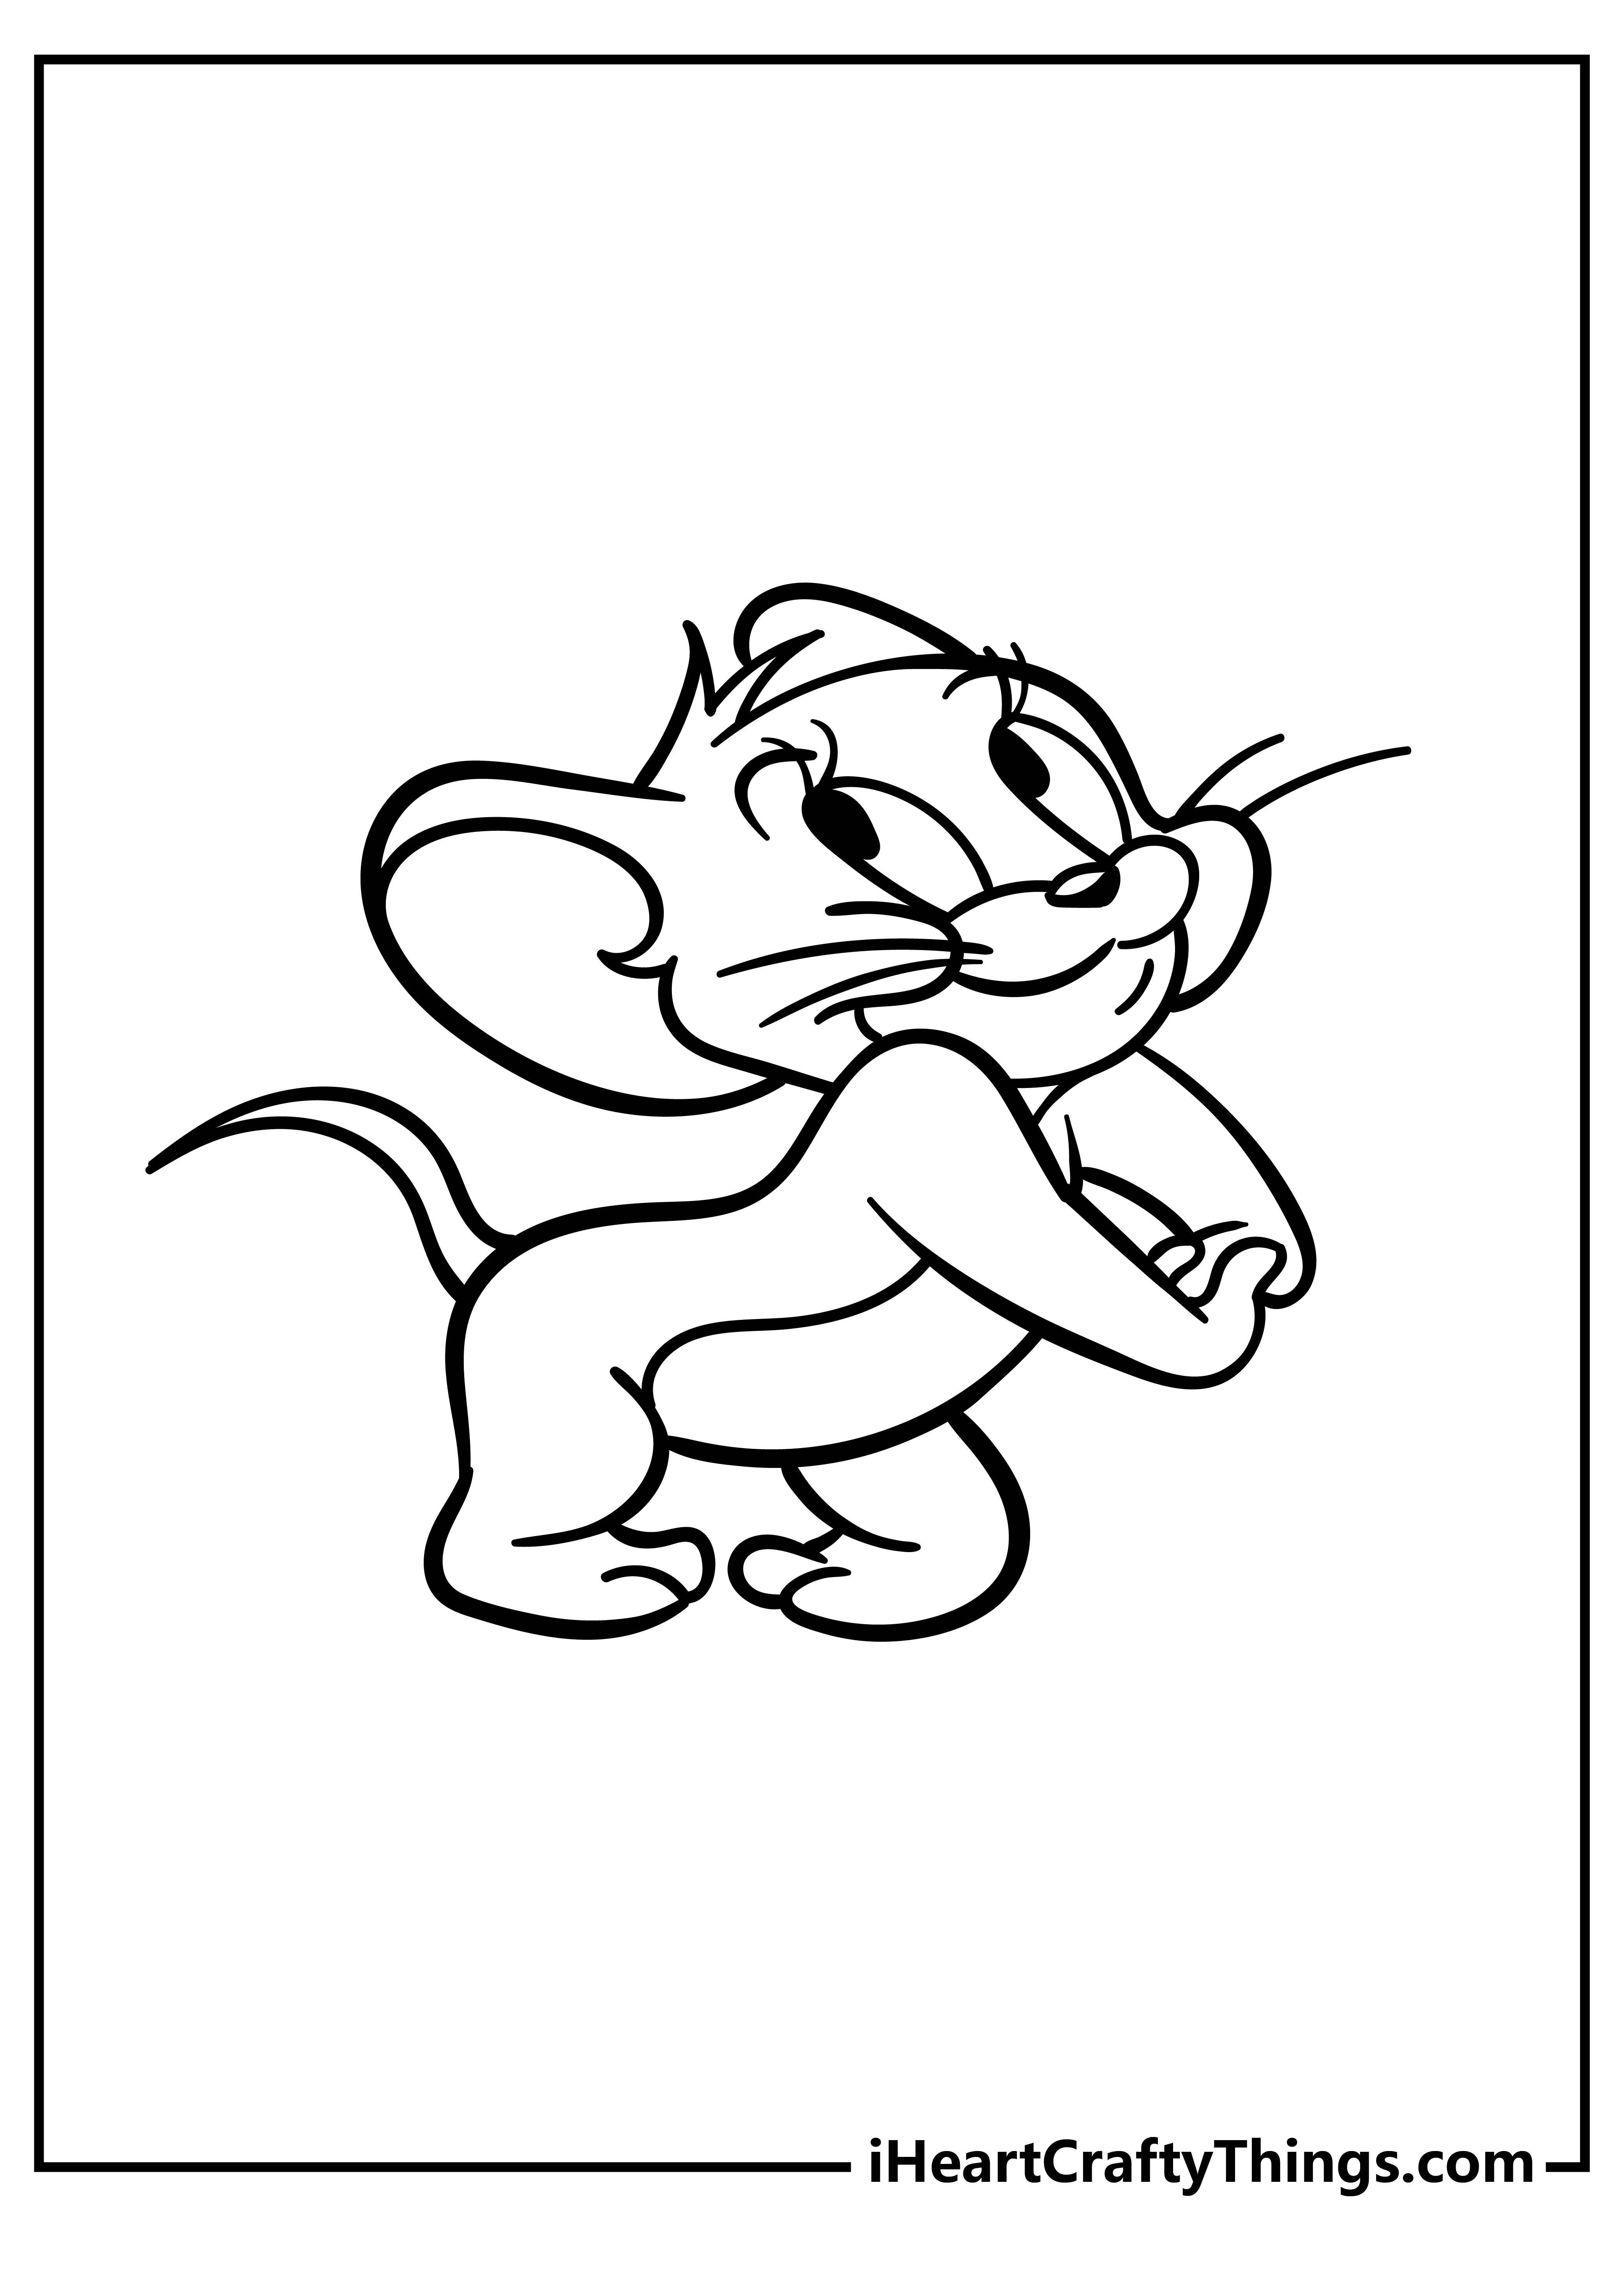 Tom and Jerry Coloring Pages free pdf download